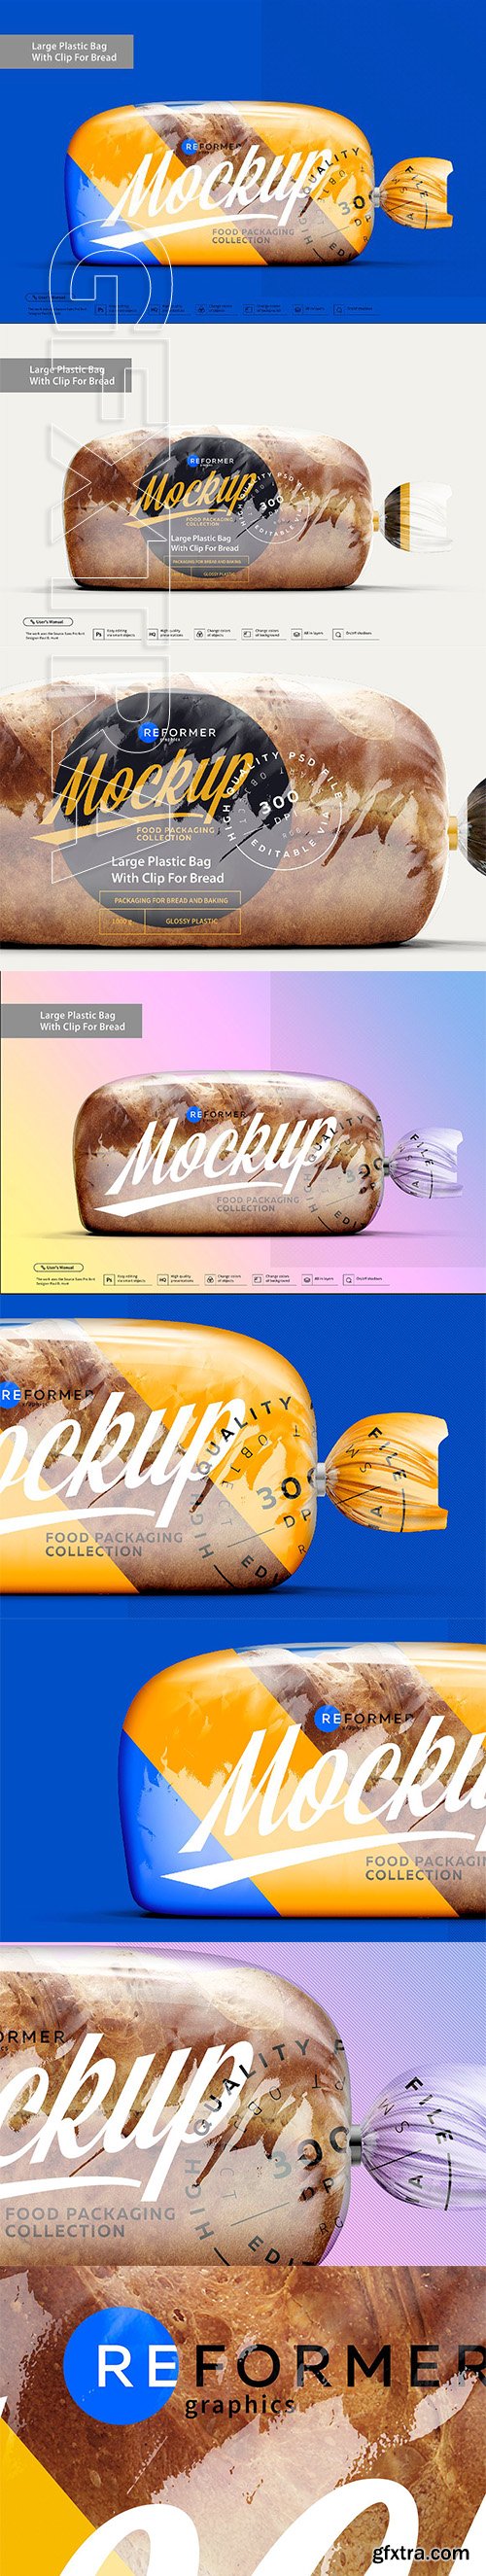 Download Free Large Plastic Bag With Clip For Bread 10314 Search Results PSD Mockups.